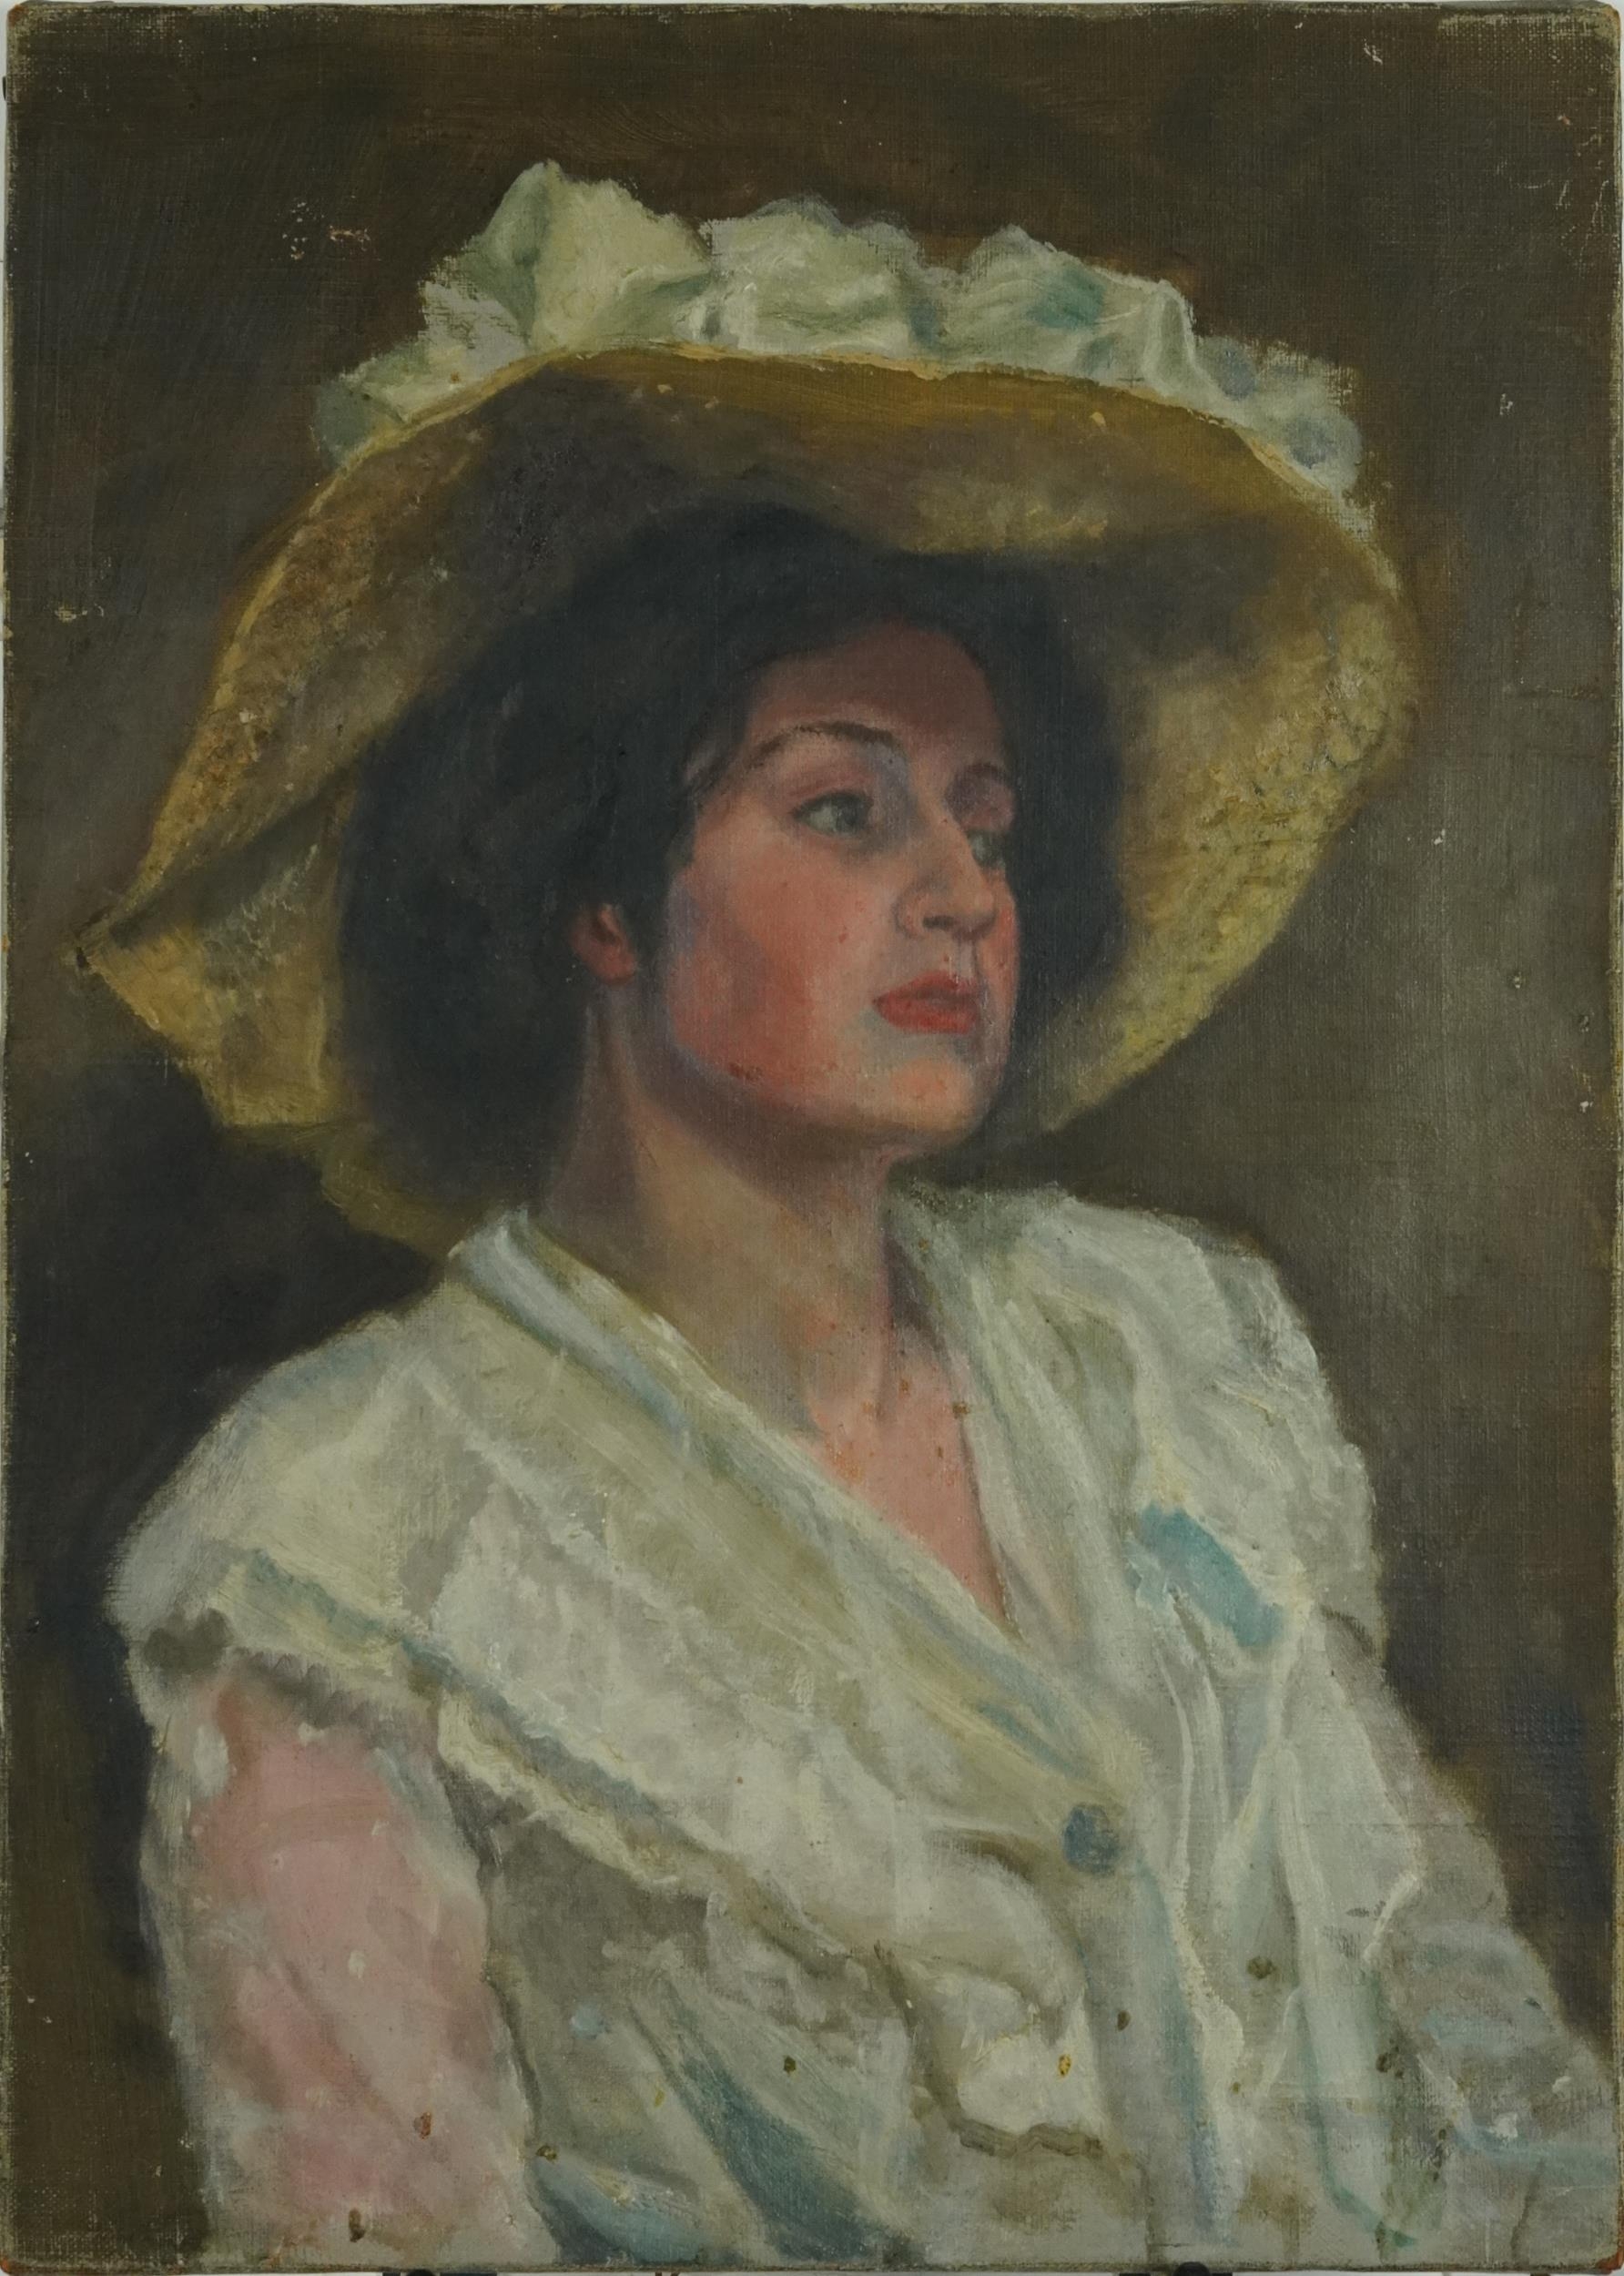 Top half portrait of a female wearing a wide brimmed hat and white lace top, early 20th century